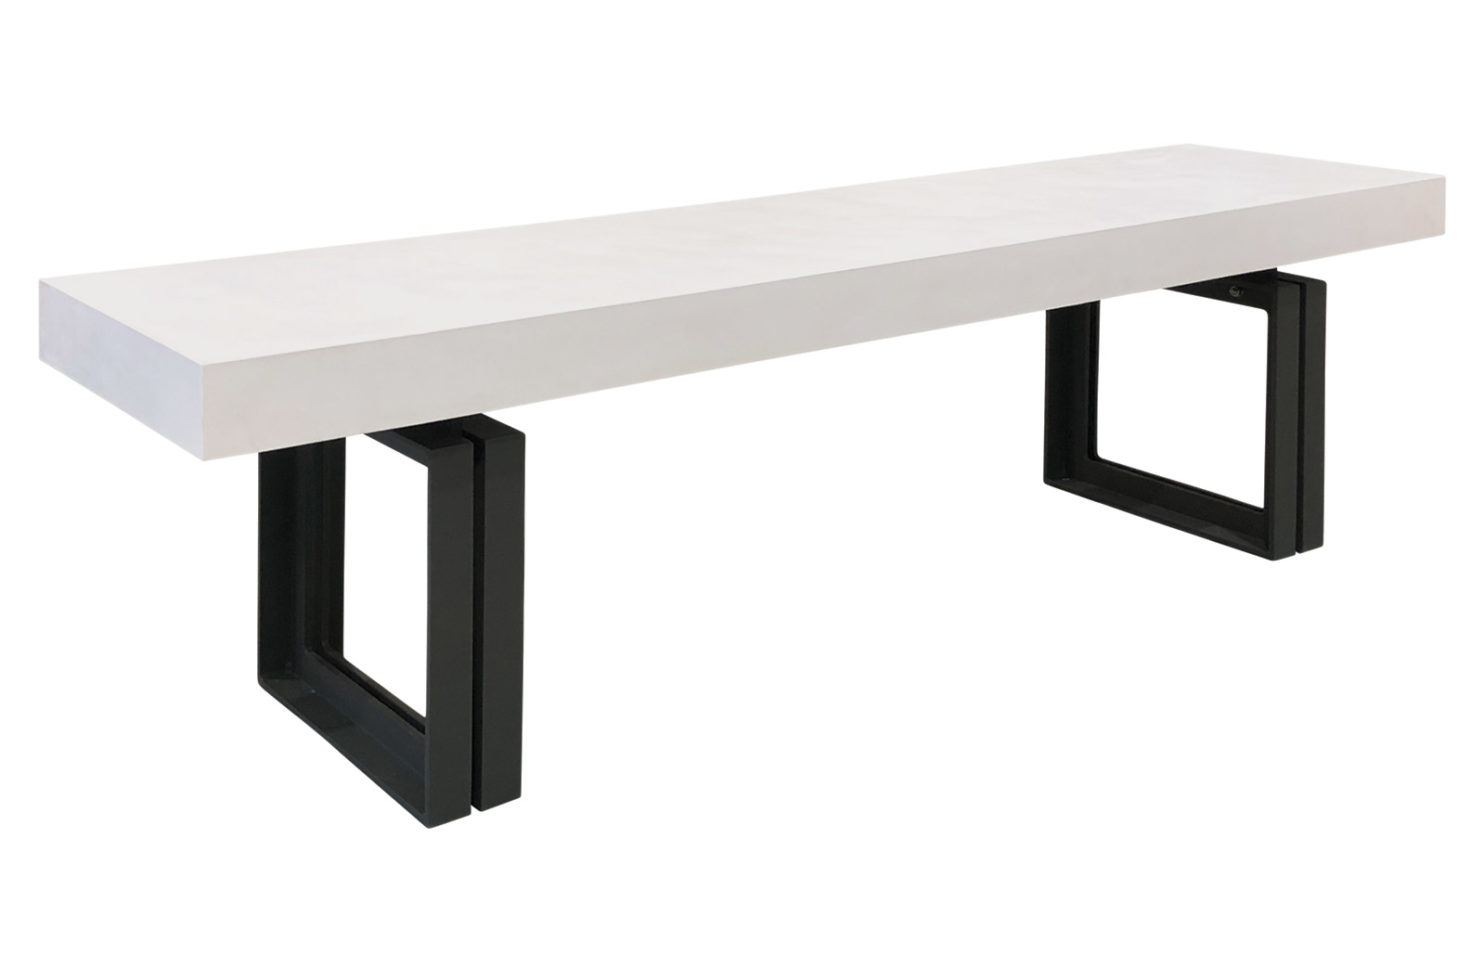 Seasonal Living Perpetual Concrete and Steel Senza Bench  Ivory White